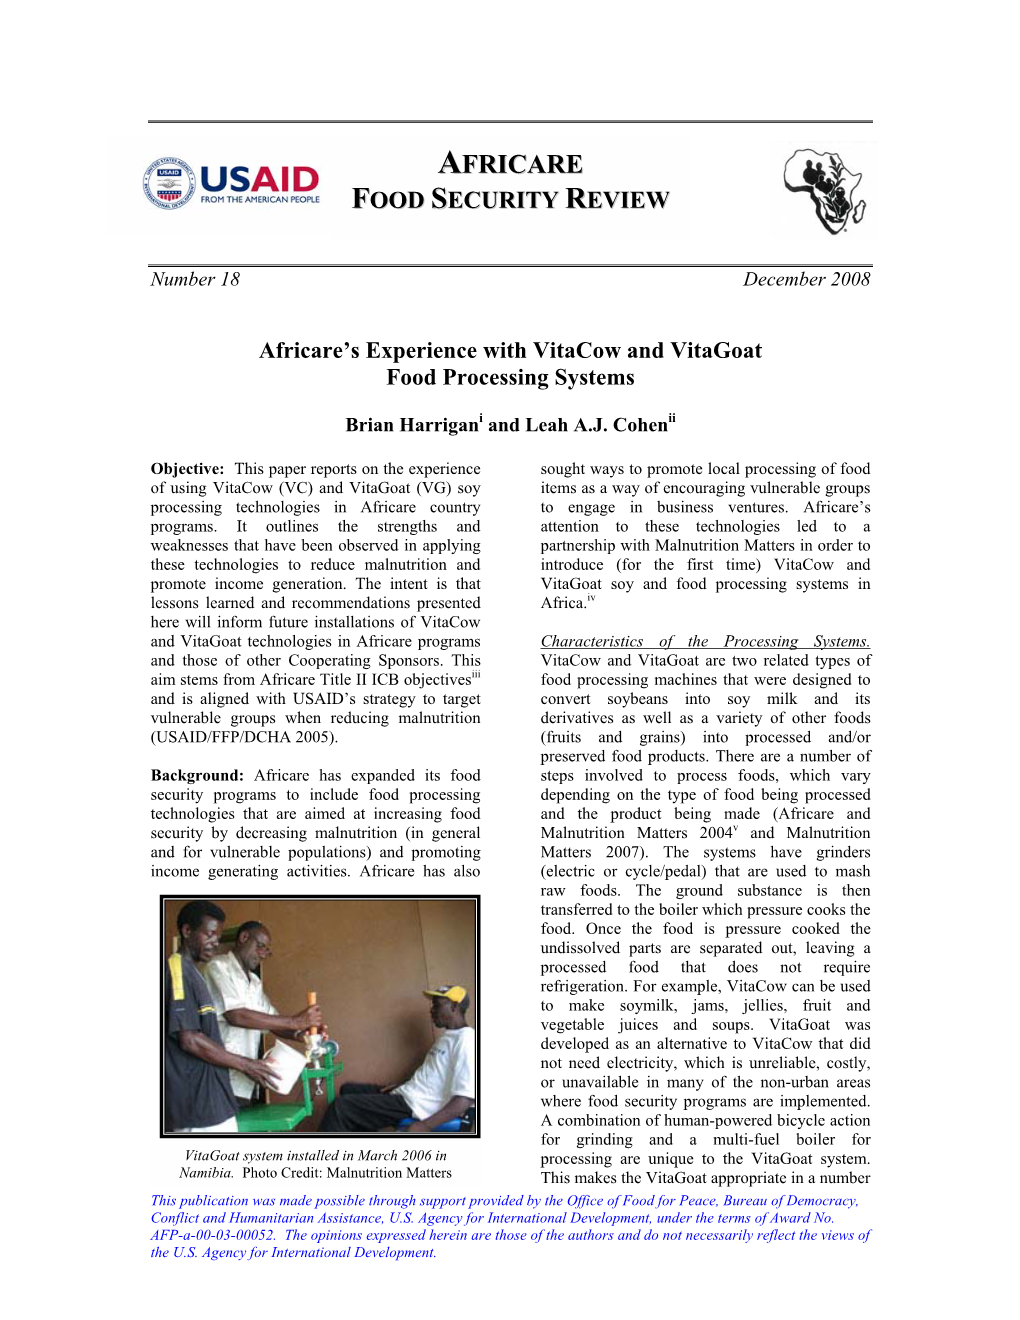 Africare's Experience with Vitacow and Vitagoat Food Processing